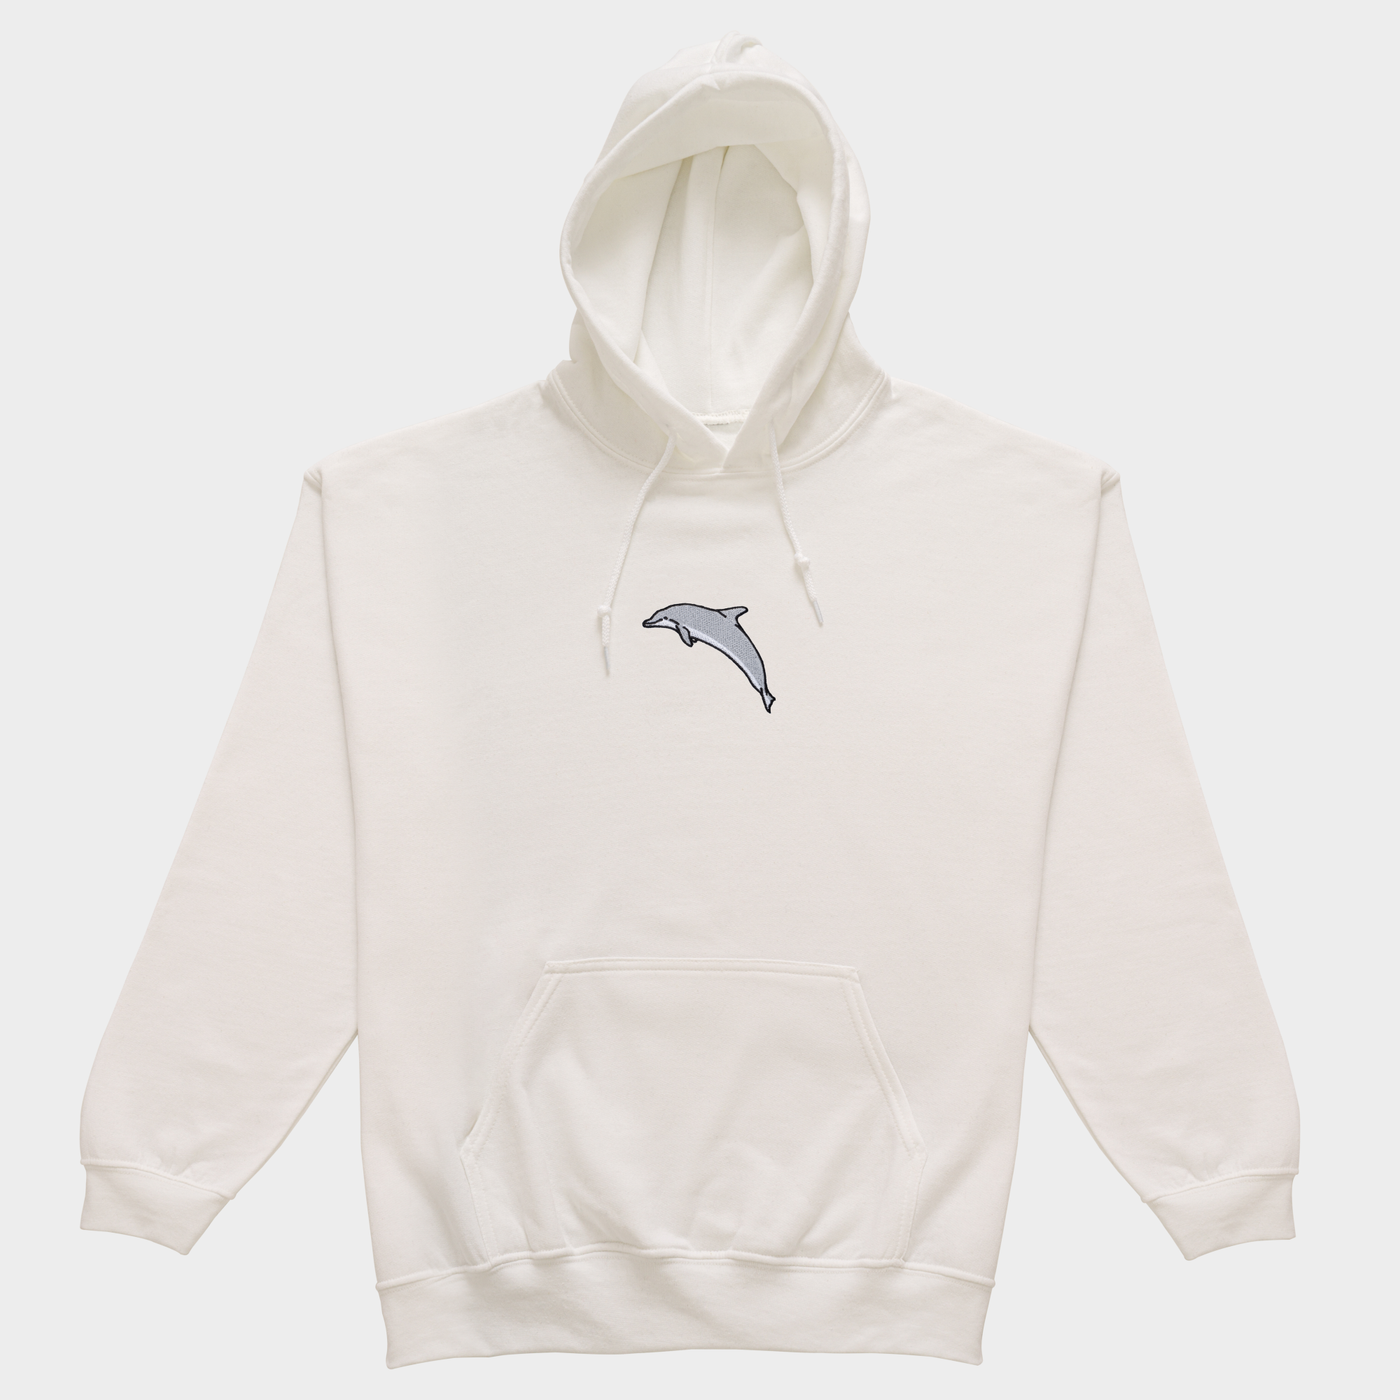 Bobby's Planet Men's Embroidered Dolphin Hoodie from Seven Seas Fish Animals Collection in White Color#color_white